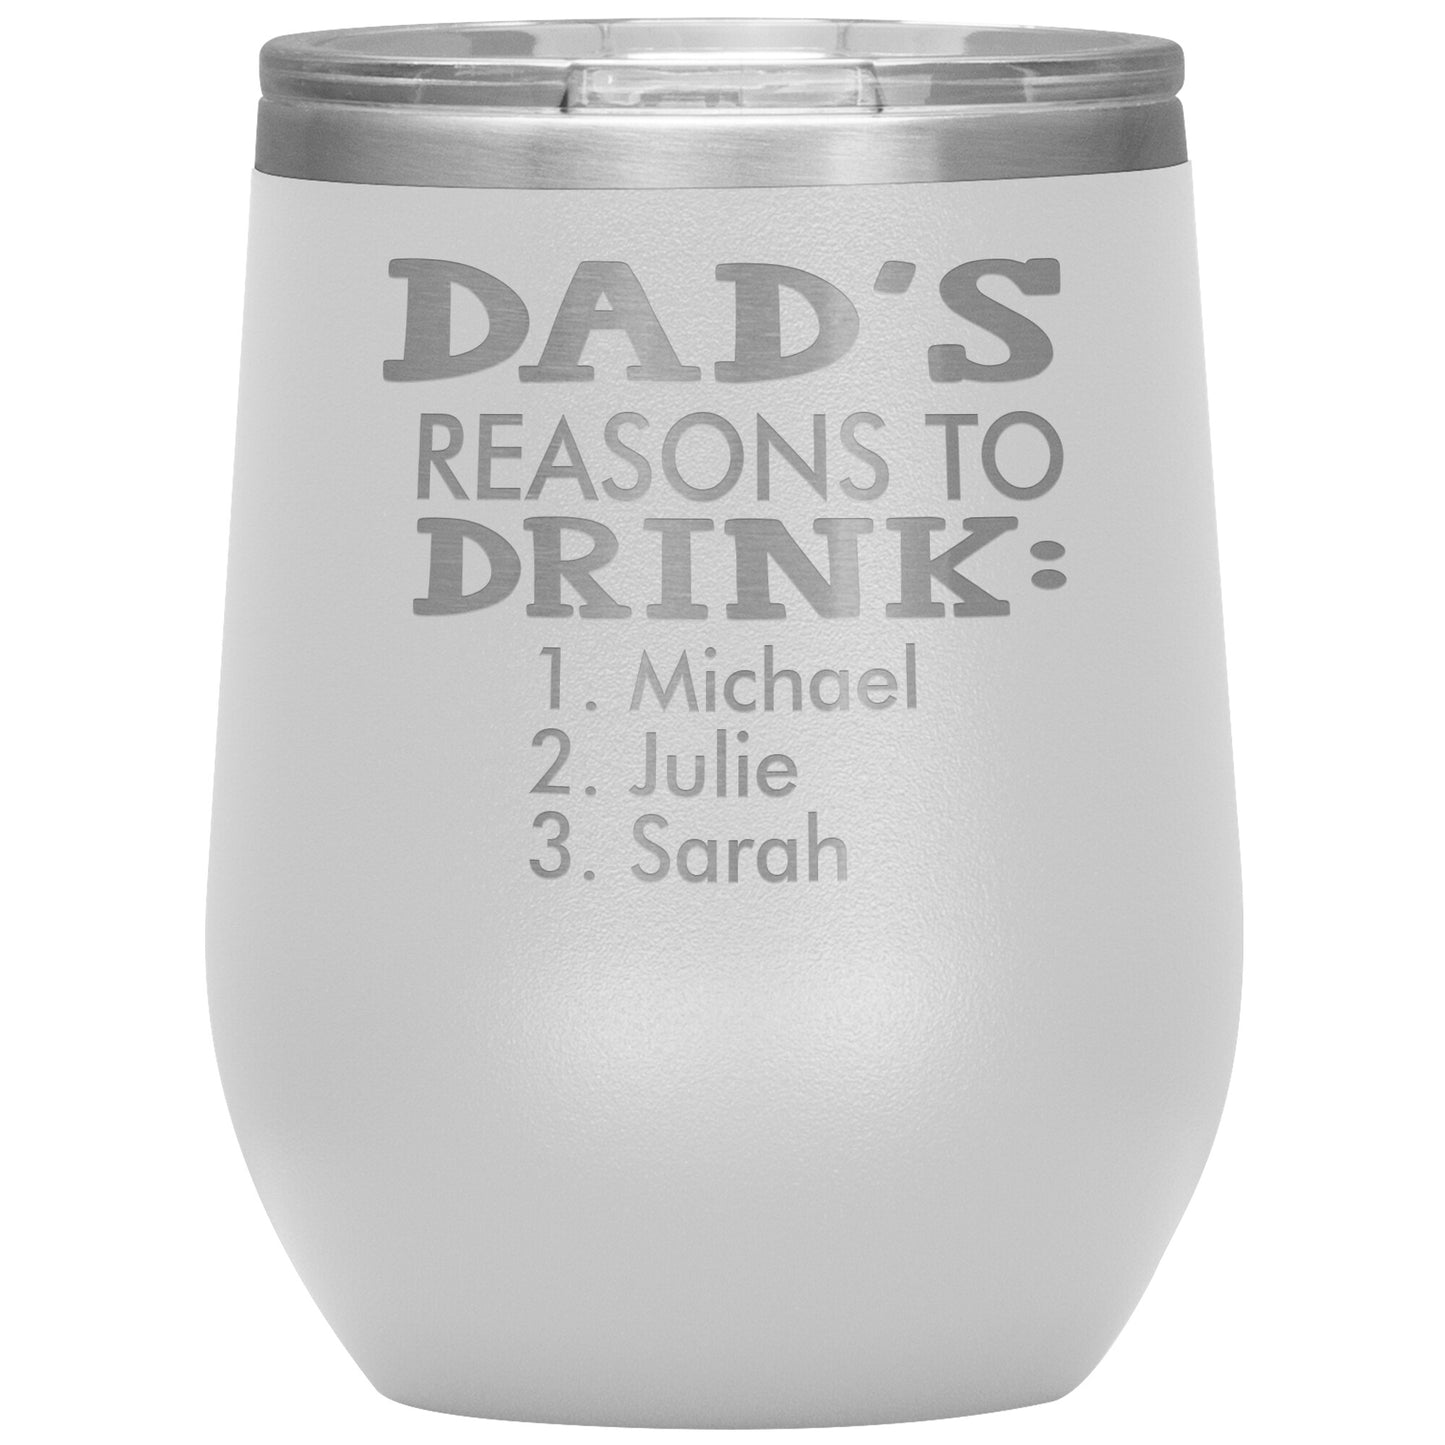 Dad's Reasons to Drink Tumbler